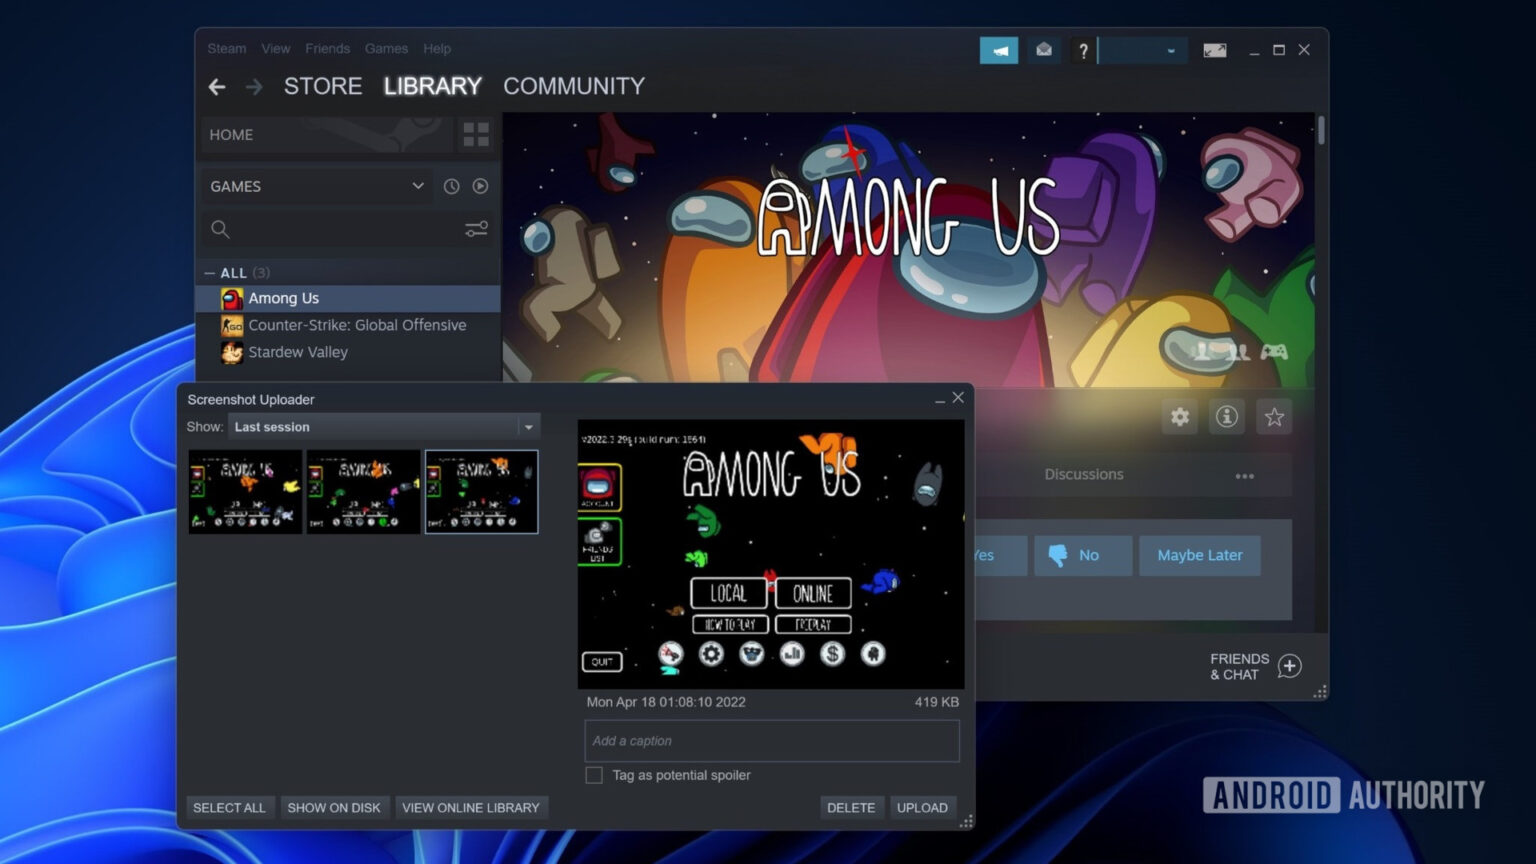 Can find user on steam фото 87